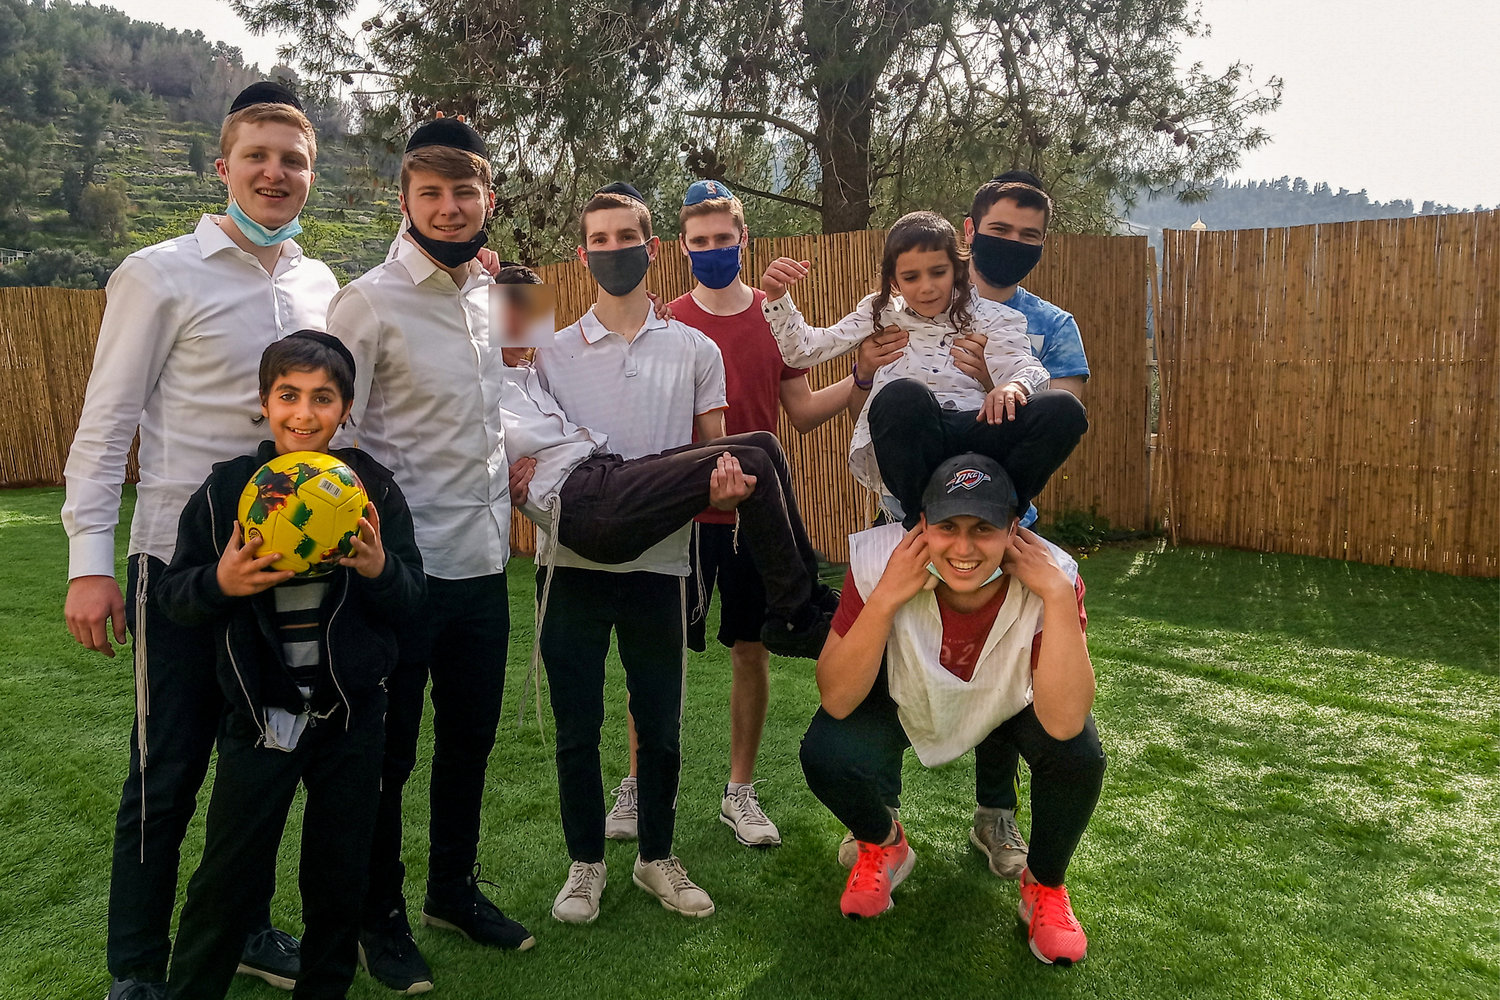 Avi Kroll, a former student at SAR High School, has volunteered in many places, but most recently traveled to Israel to help out the Sanhedria Children’s Home. Kroll hosted a ‘sports day’ for the kids at the home over the most recent Passover holiday, giving them a chance to fill their day with soccer.